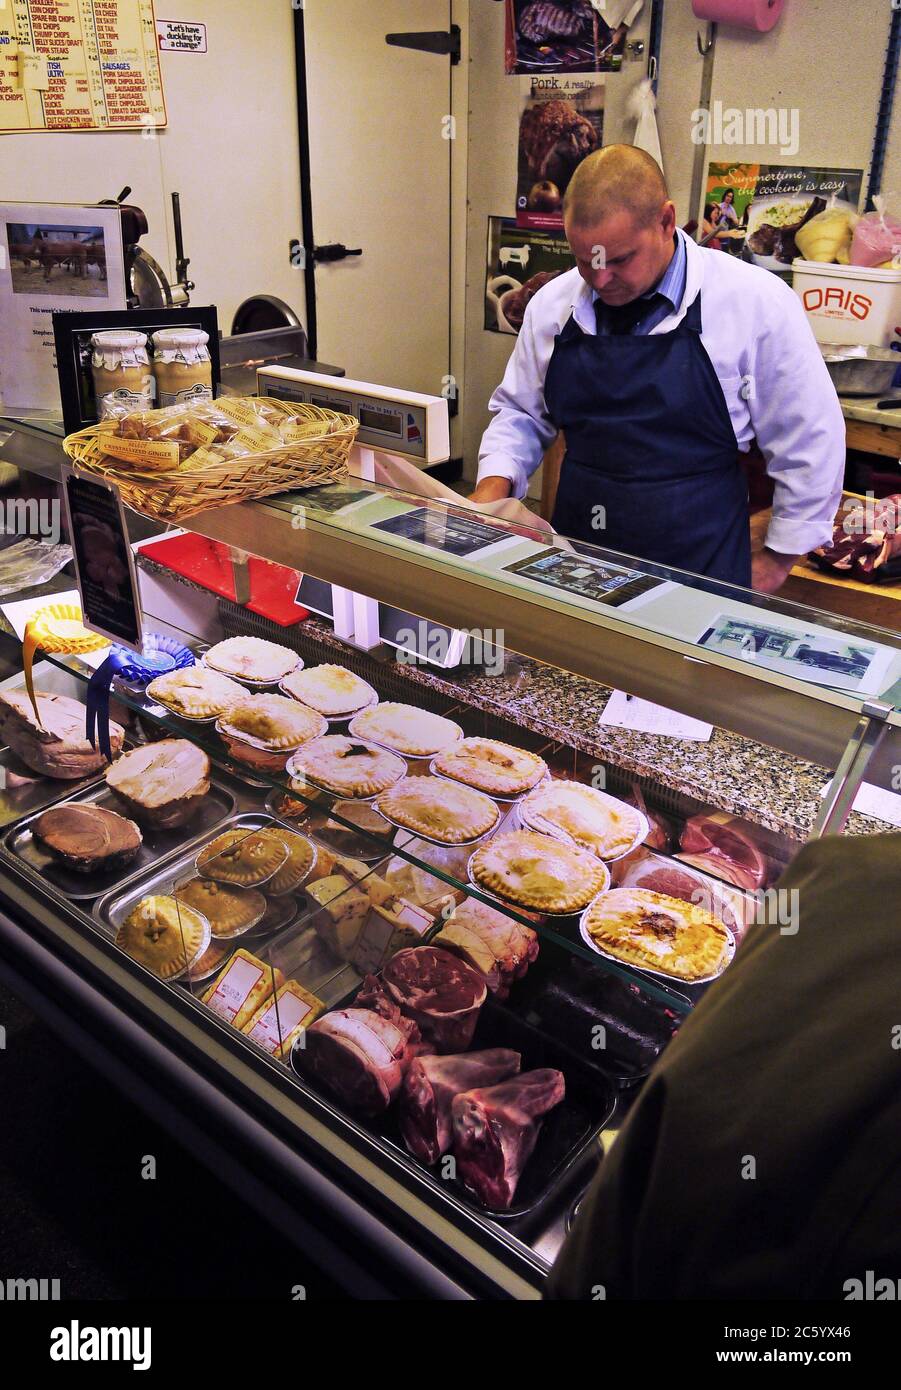 A bake shop selling meat pies and breads in Bakewell, England UK. Stock Photo